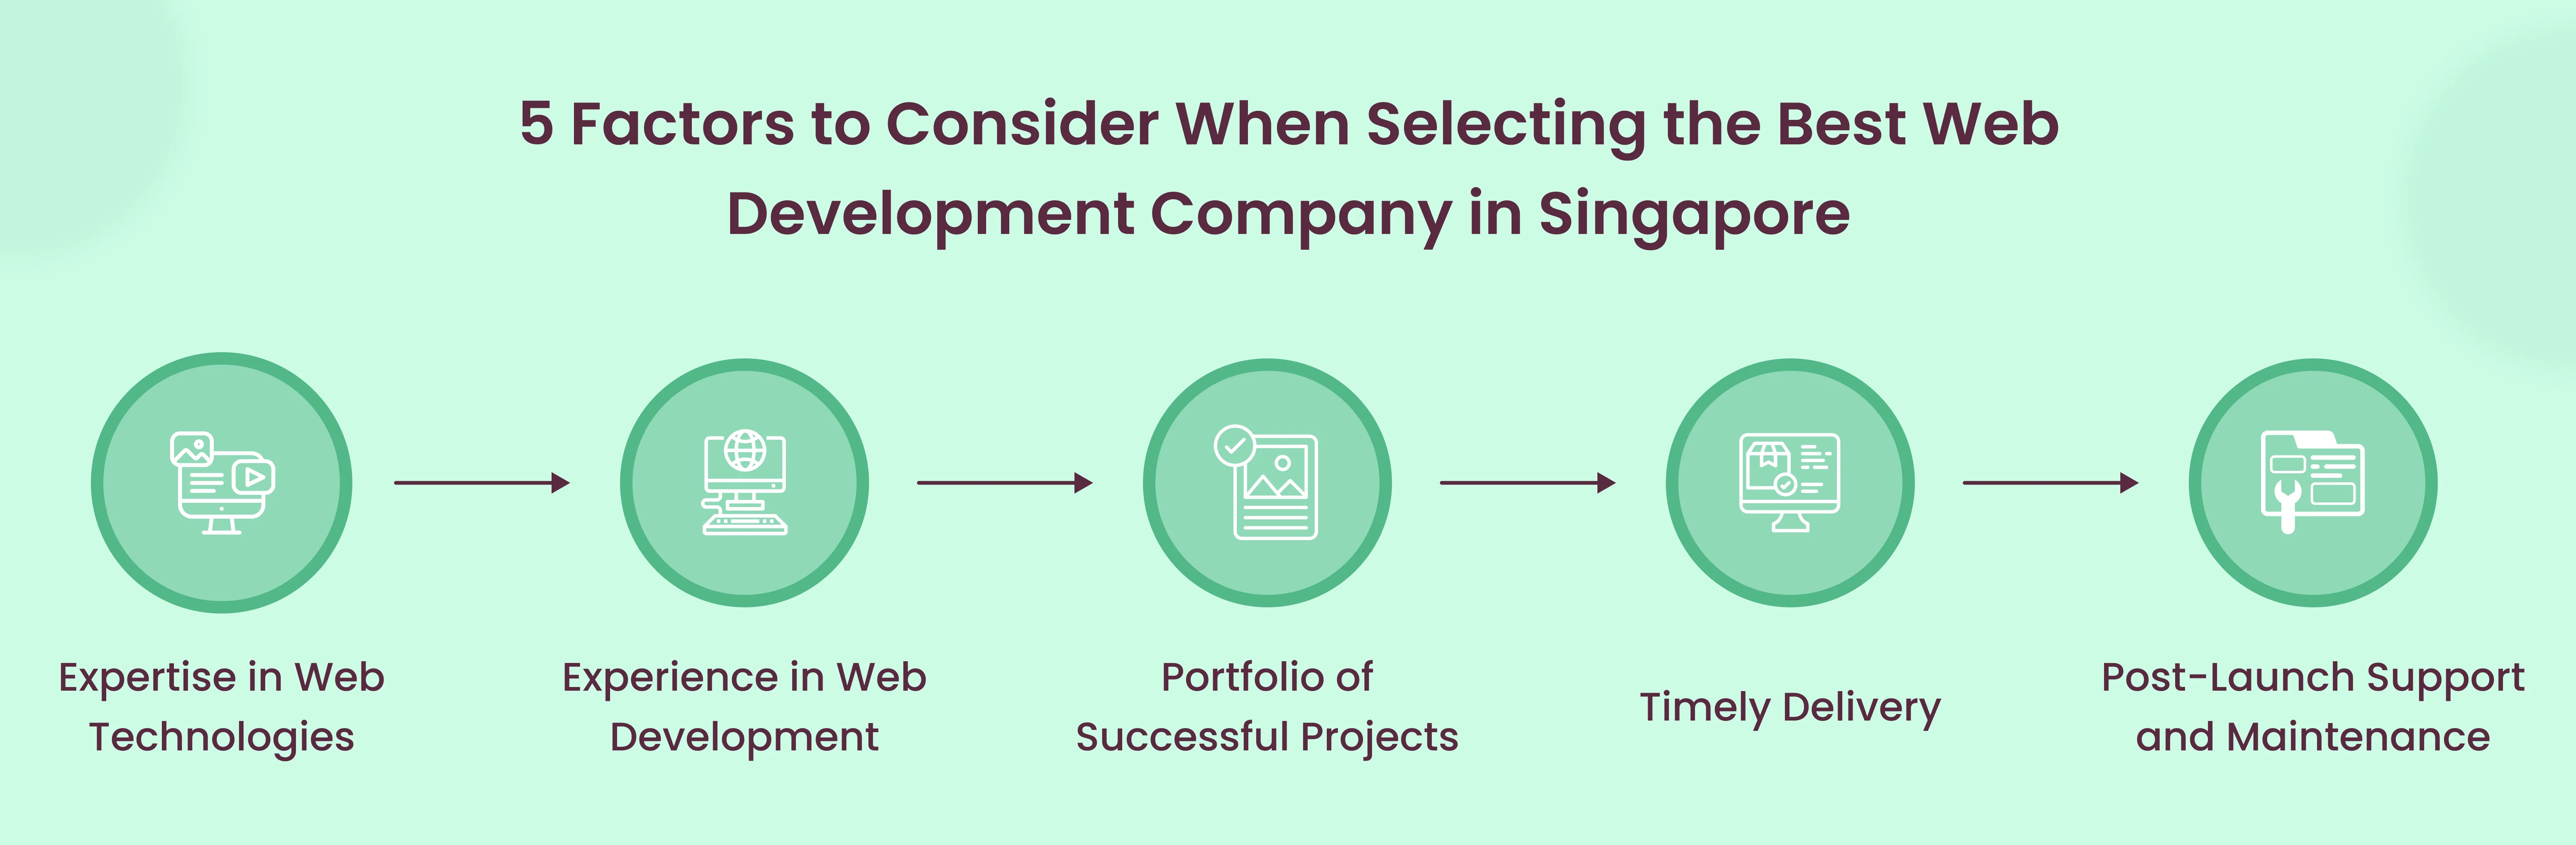 A Visual Representation of 5 Factors to consider when selecting the best web development company in Singapore